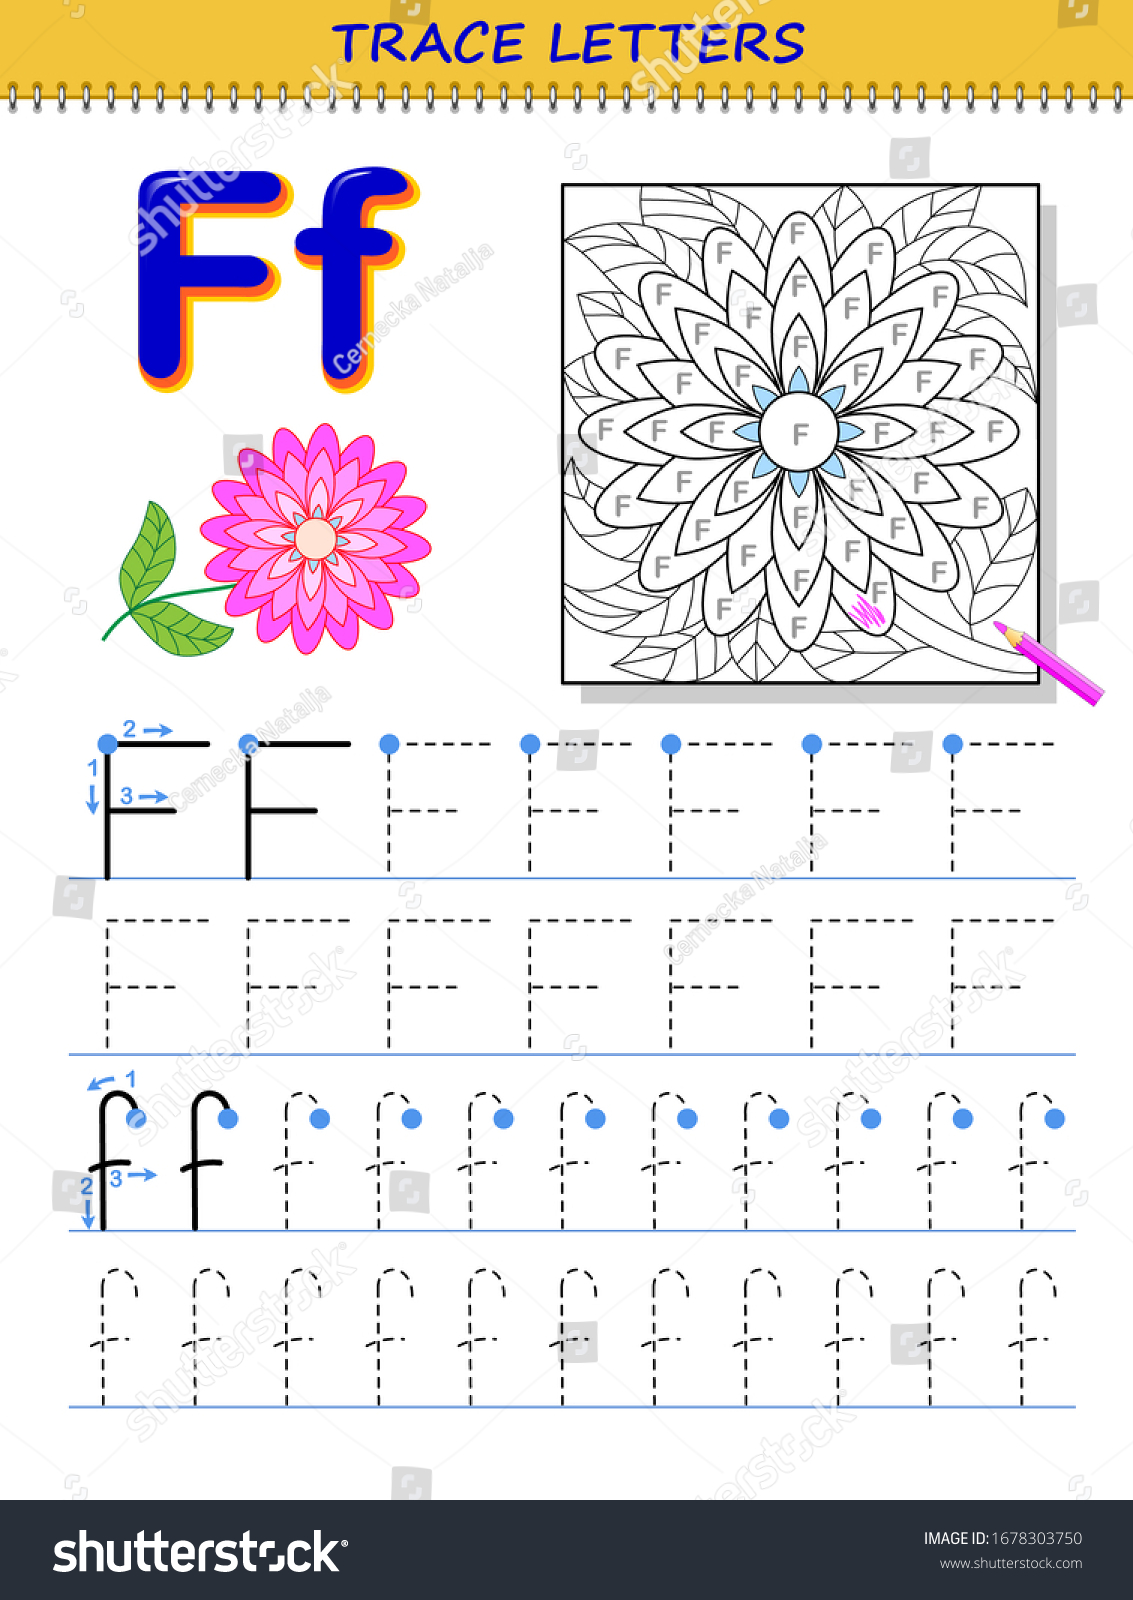 Tracing letter f study alphabet printable stock vector royalty free